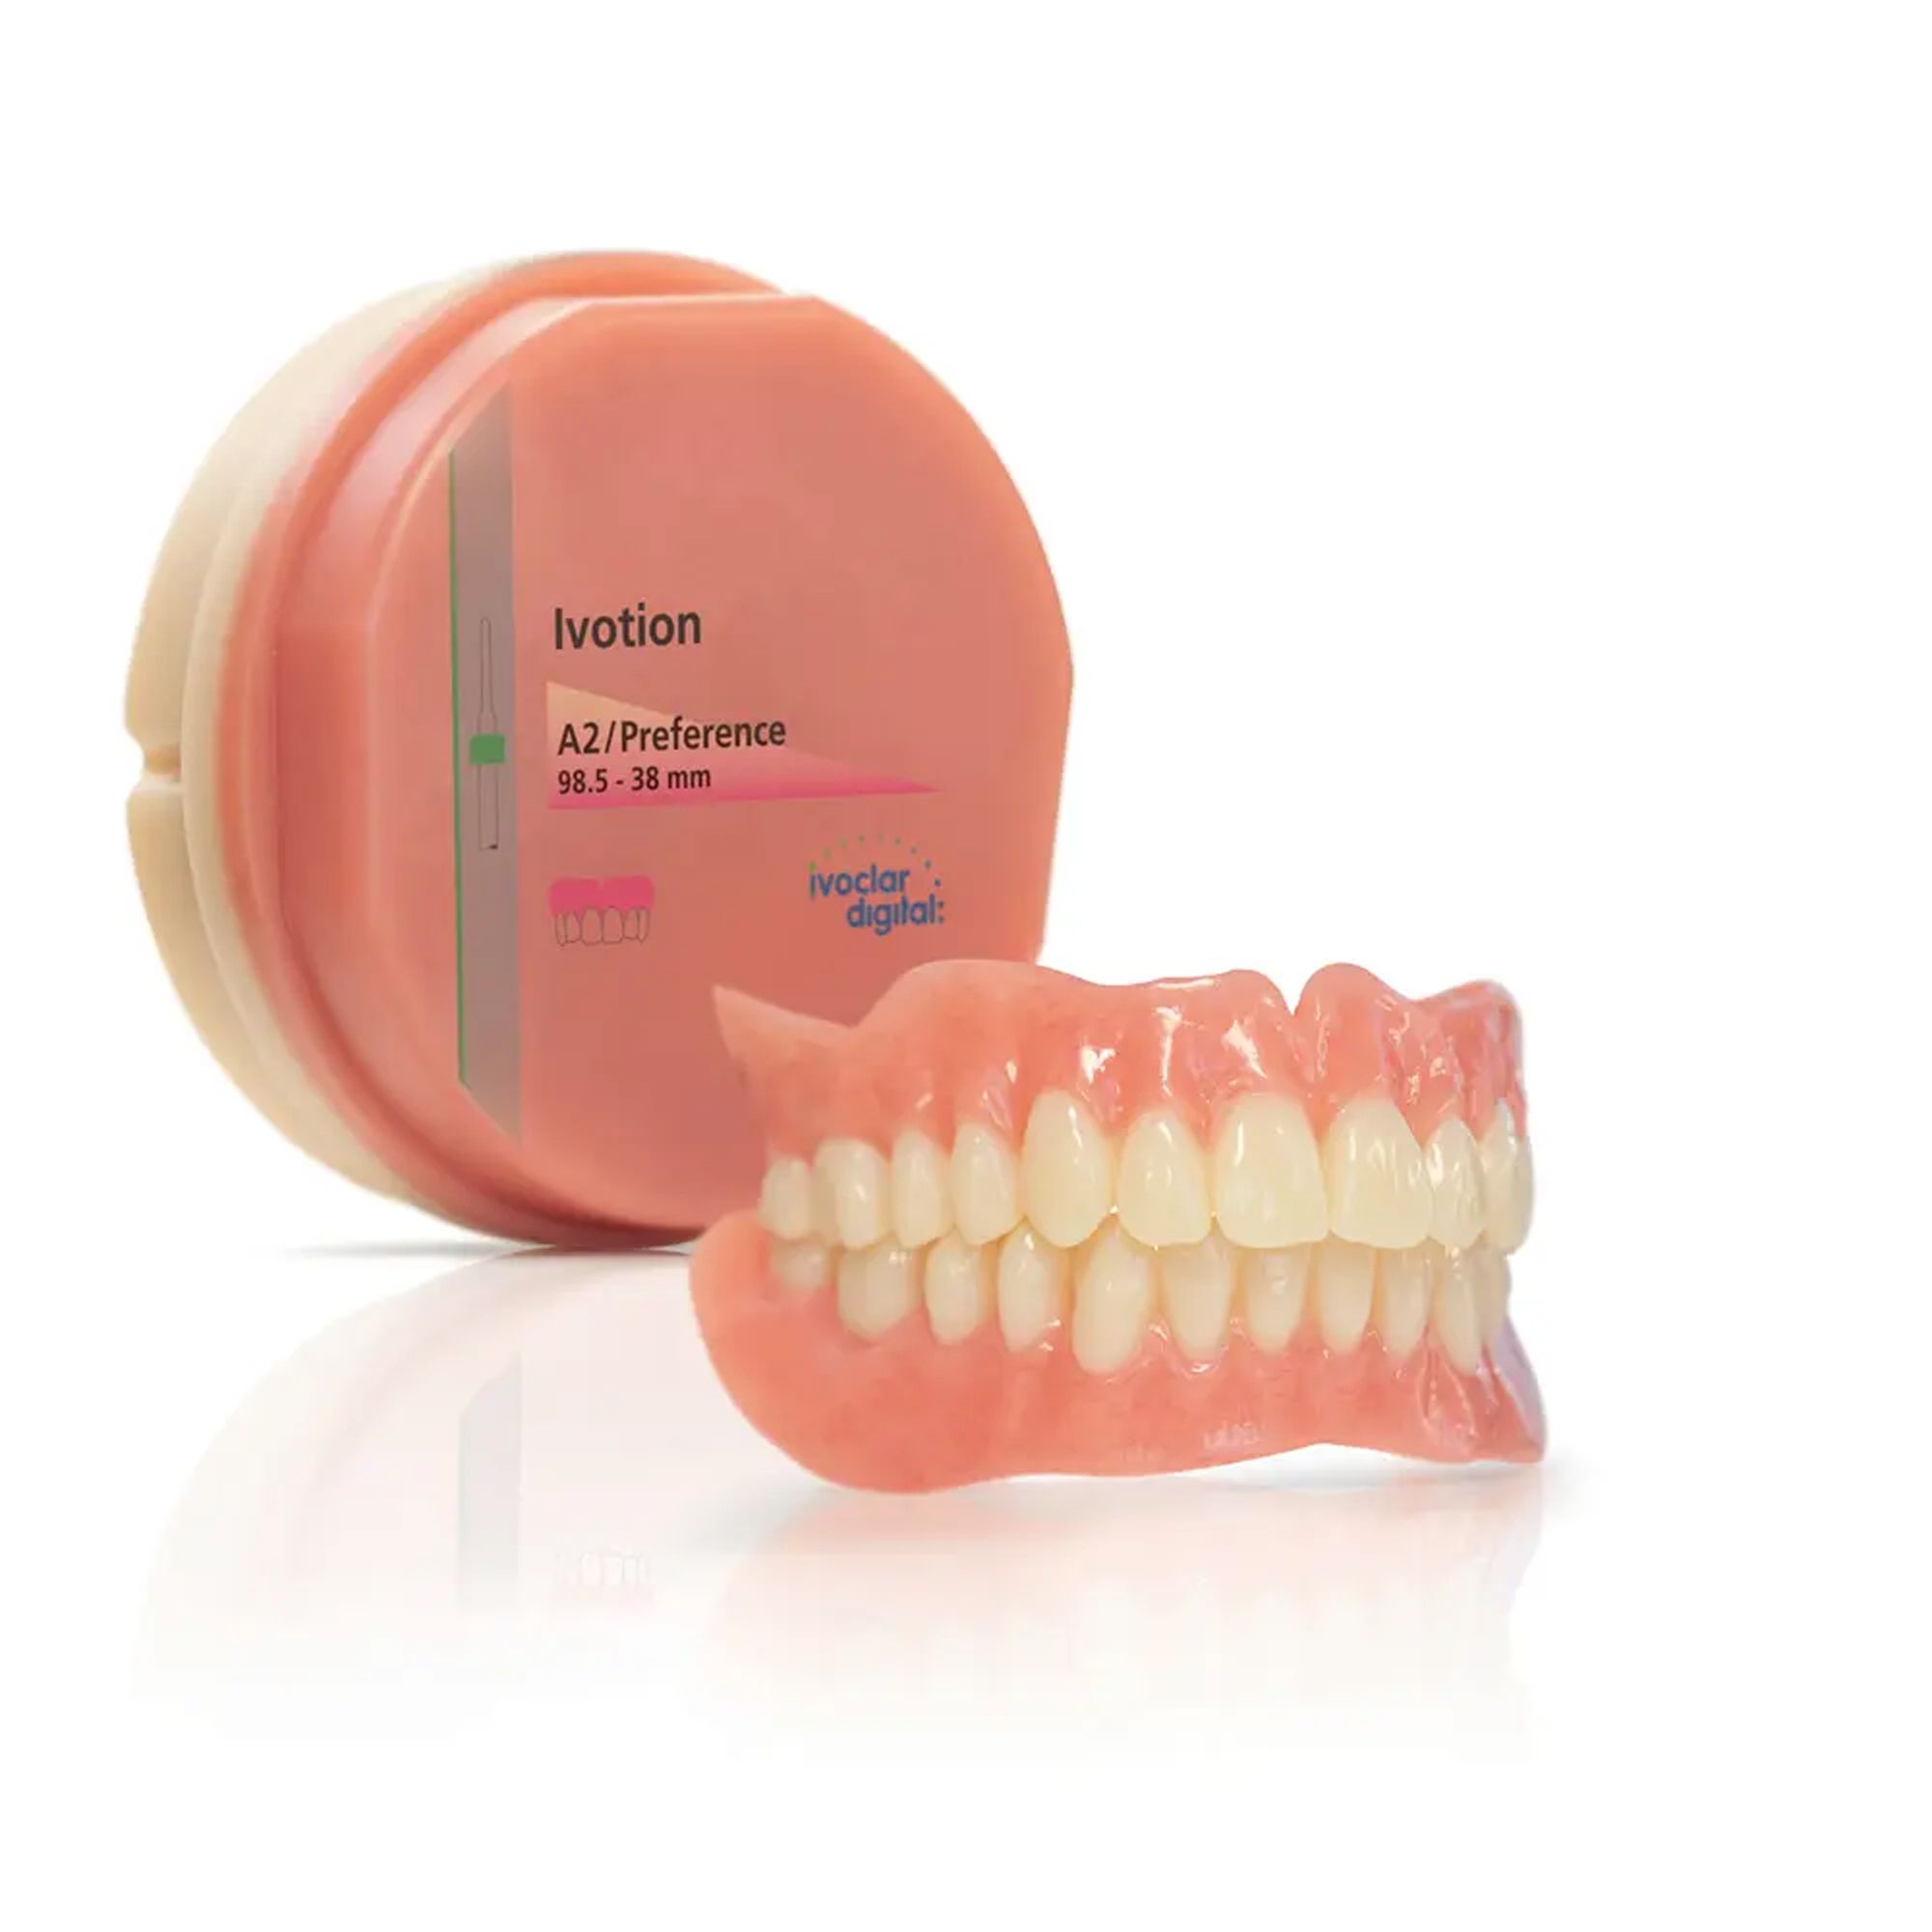  Ivoclar Added a New Shade to Ivotion Denture System 